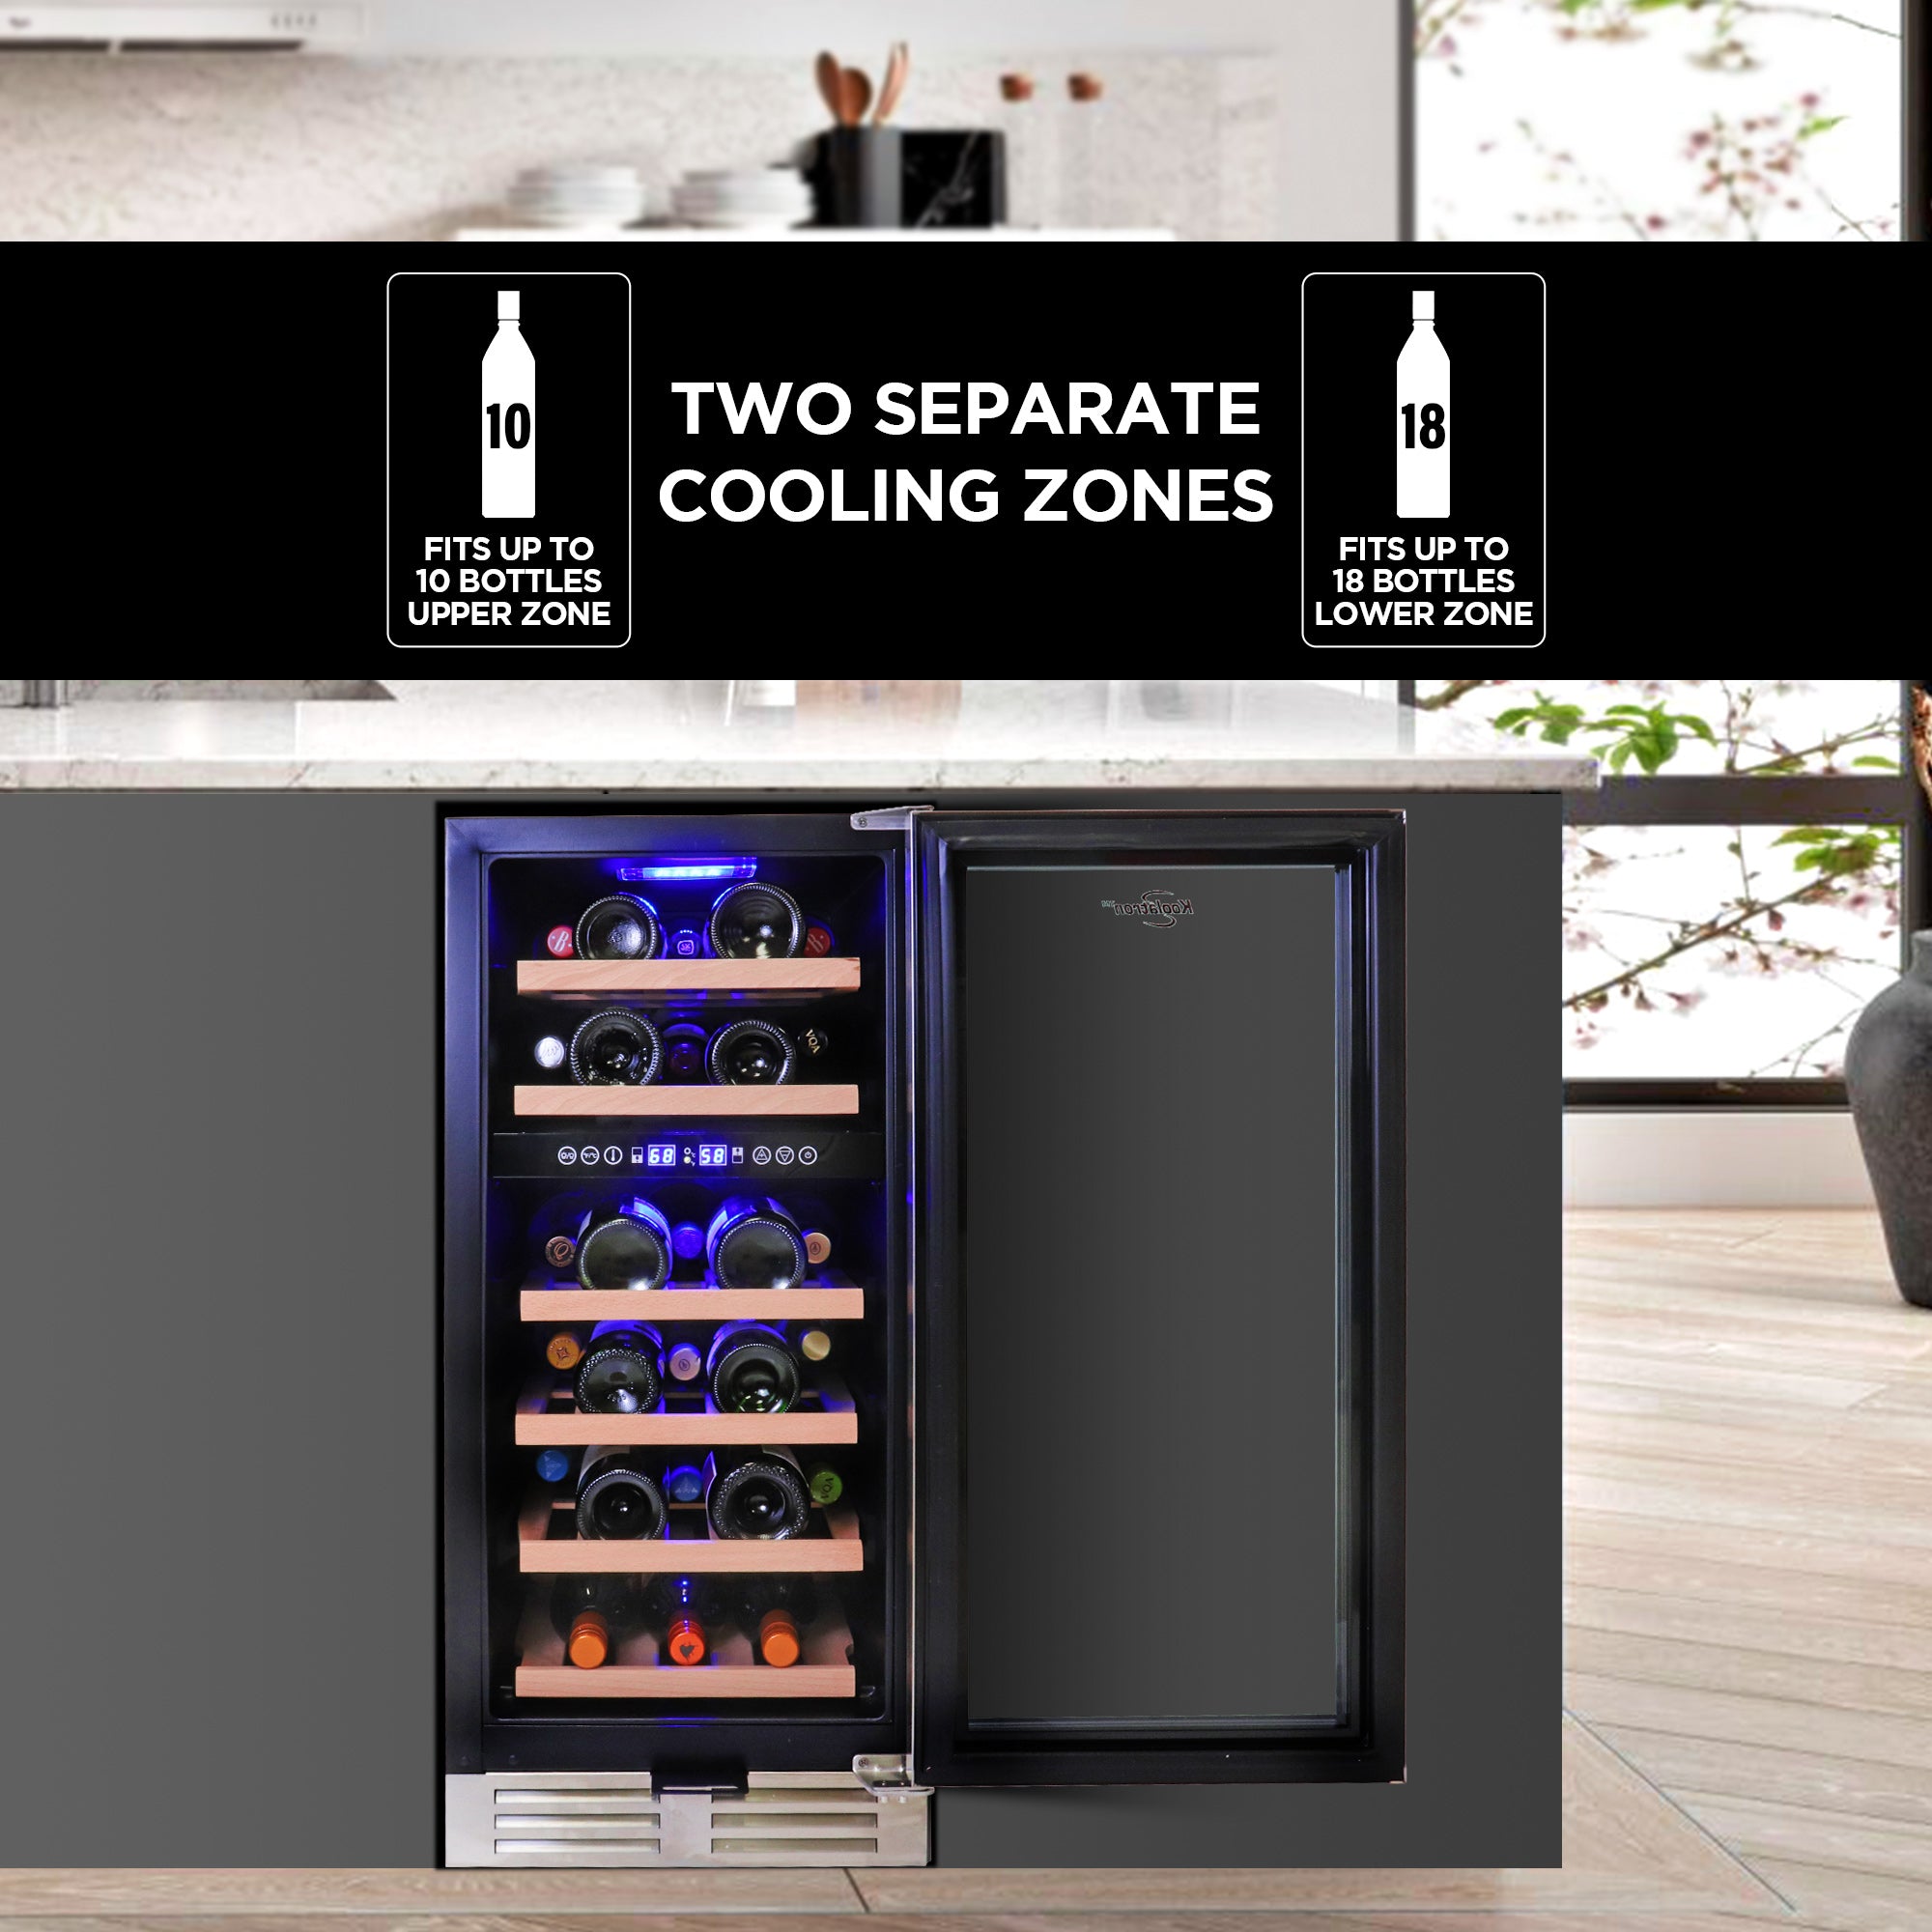 Koolatron 28 bottle compressor wine cooler, open and filled with bottles of wine, installed in a dark gray kitchen island. Text overlay reads, "Two separate cooling zones: Fits up to 10 bottles upper zone; fits up to 18 bottles lower zone"